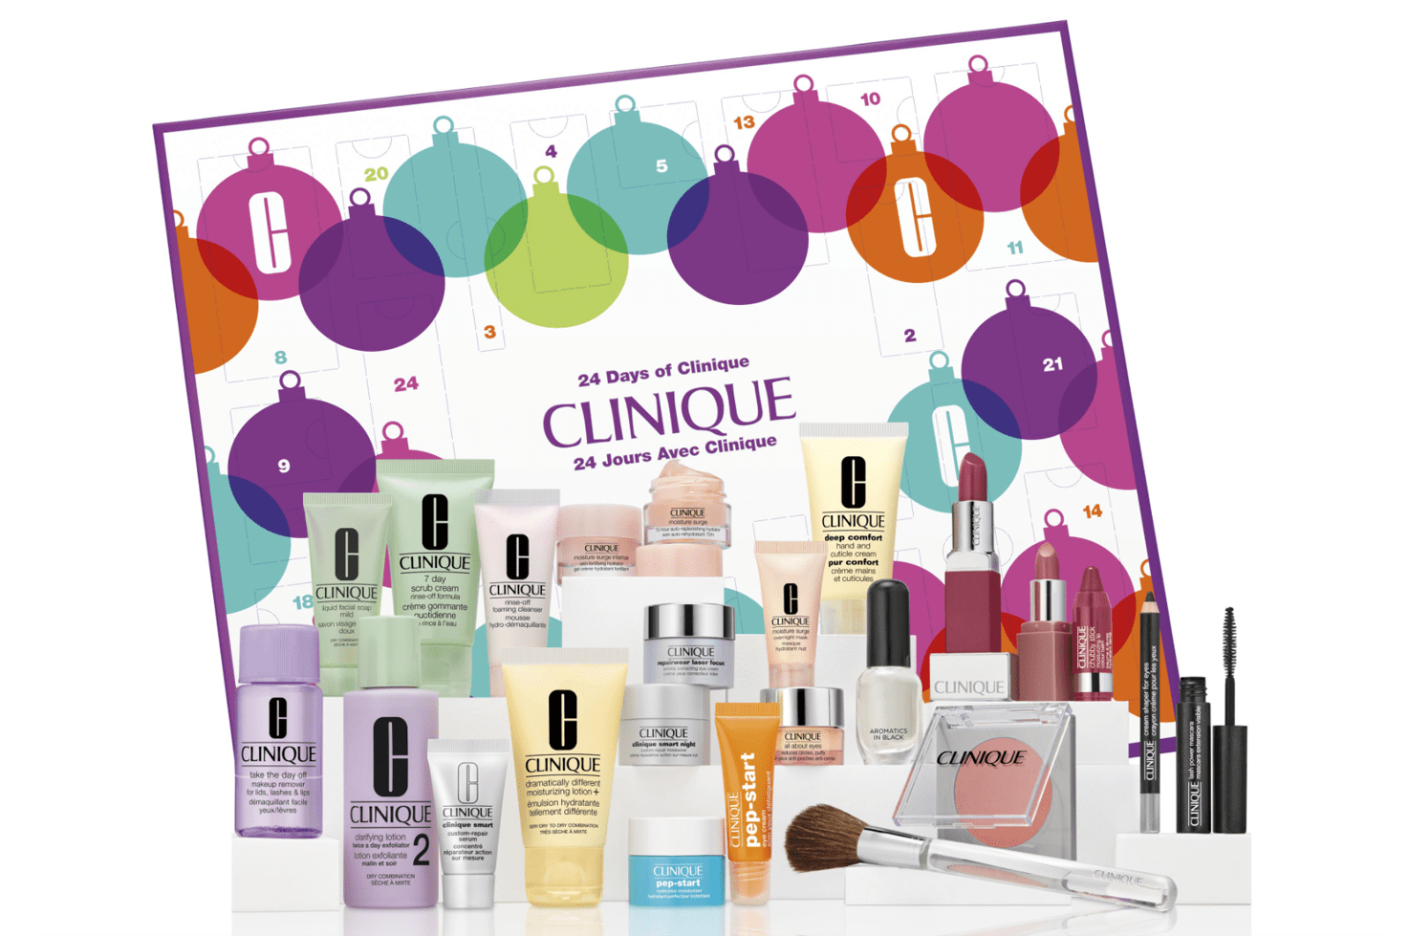 24 Days of Clinique 2018 Beauty Advent Calendar Coming Soon + Full